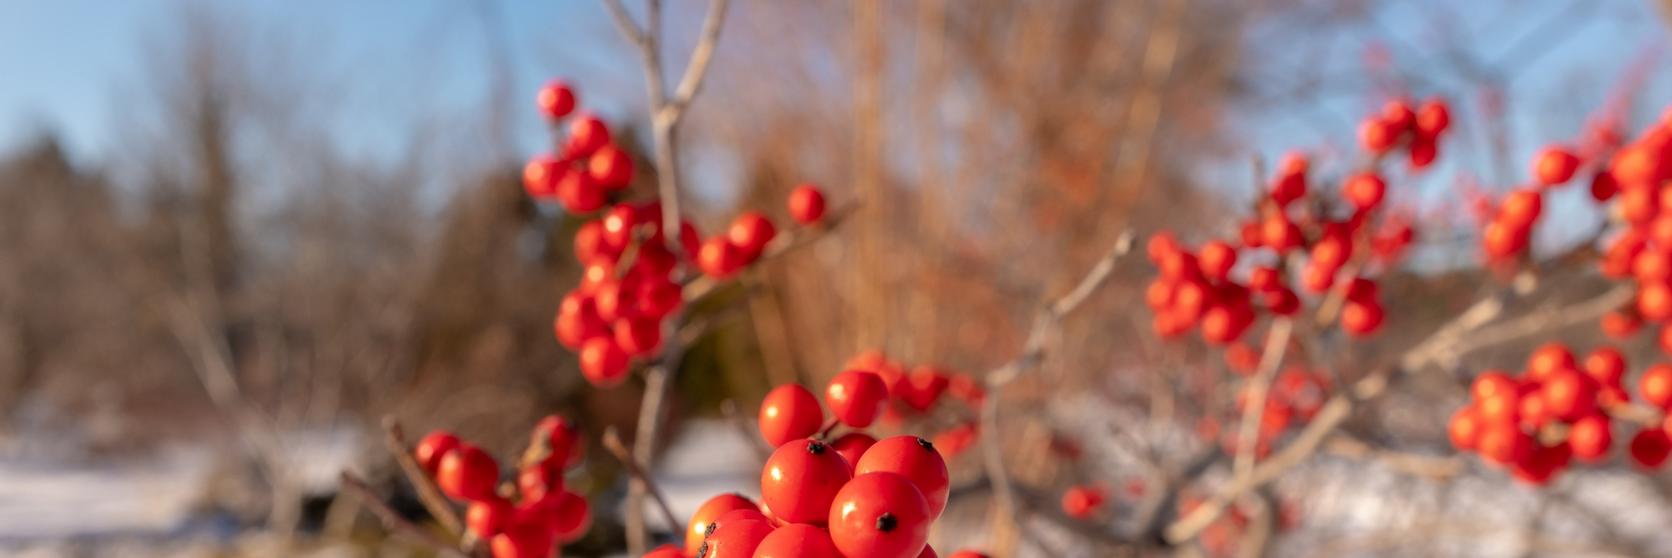 Bright_red_holly_berries_with_snowy_background